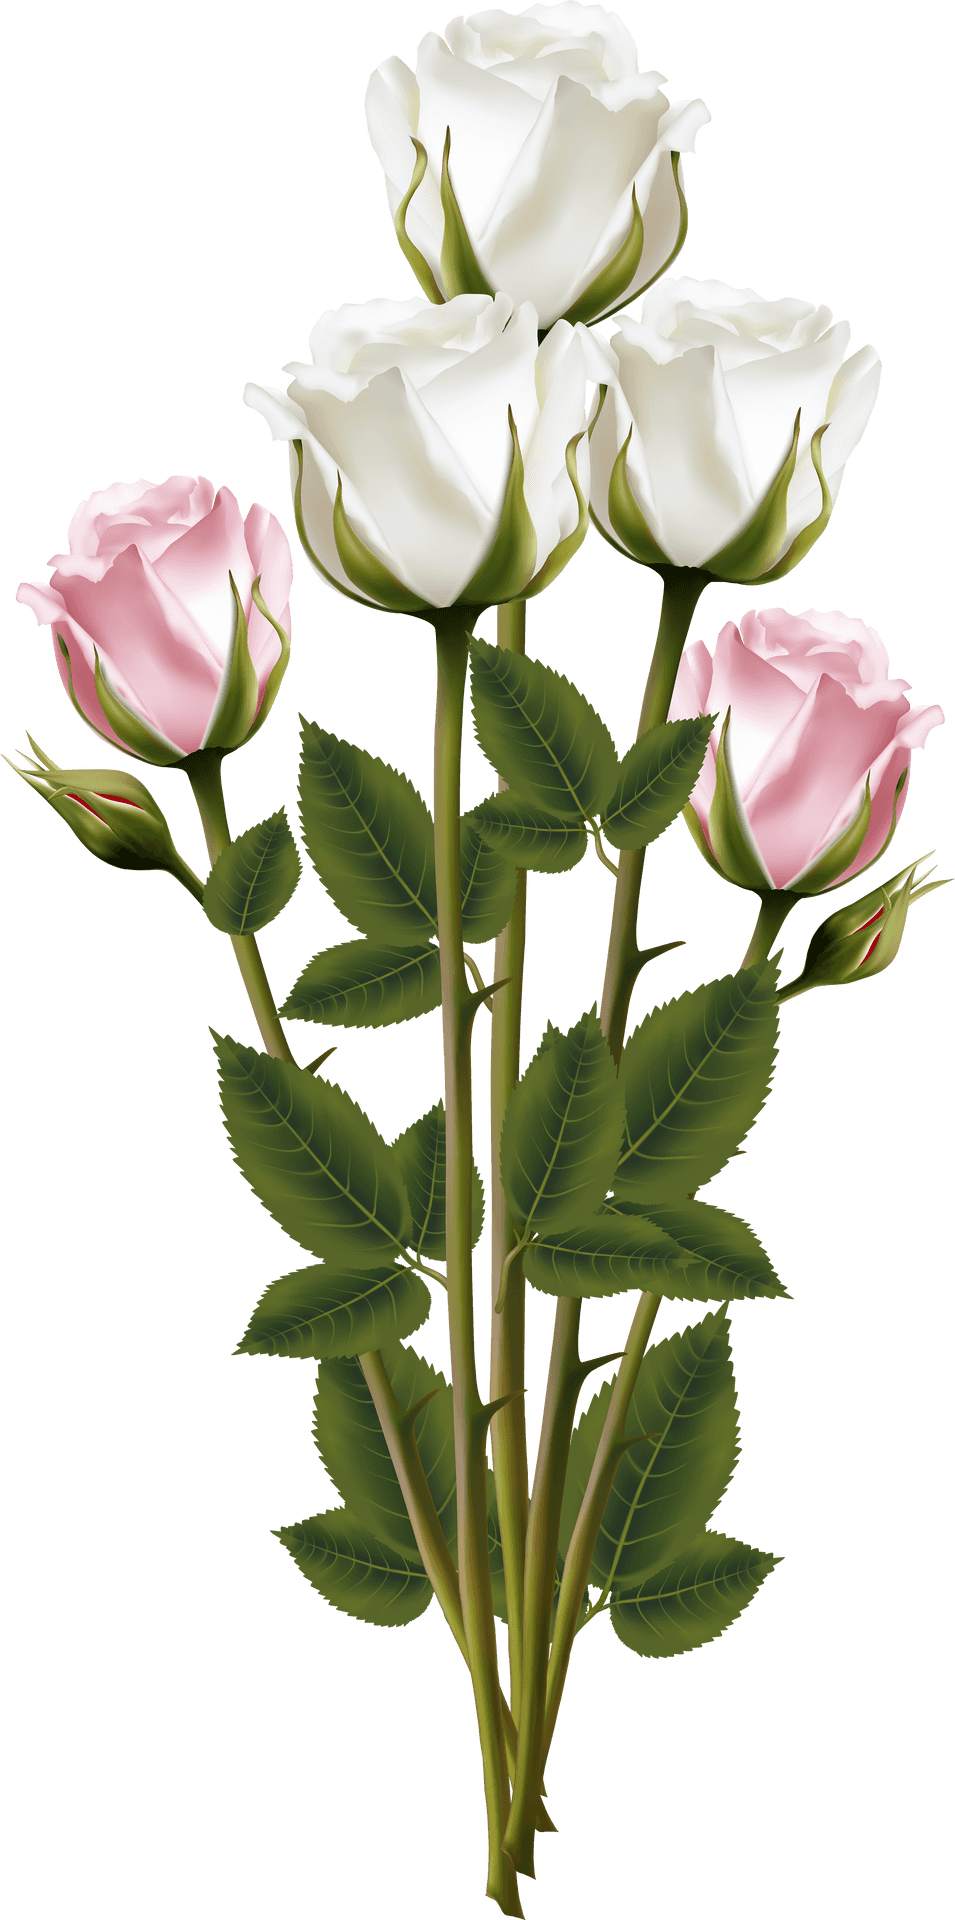 Elegant Whiteand Pink Roses Bouquet PNG